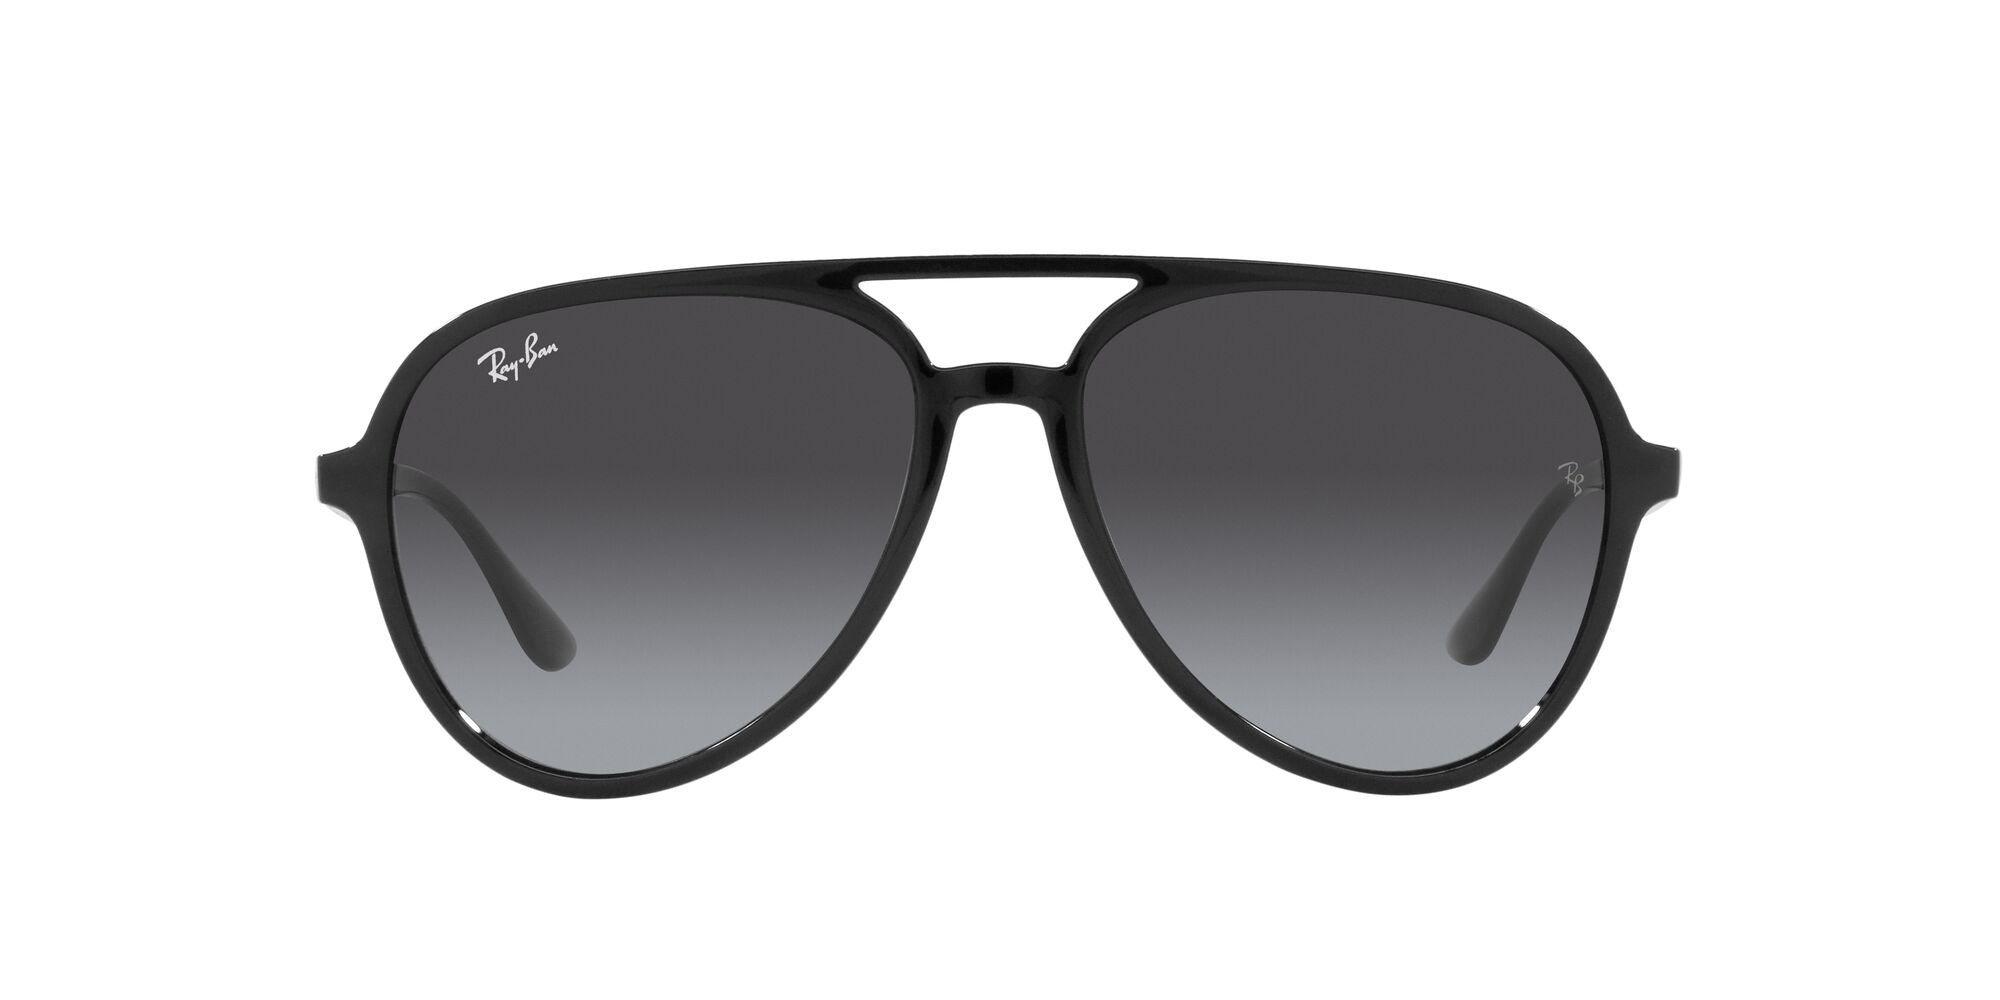 title:Ray Ban Black Sunglasses with Gray Gradient Lenses-RB_4376F_601/8G_57mm;color:Black